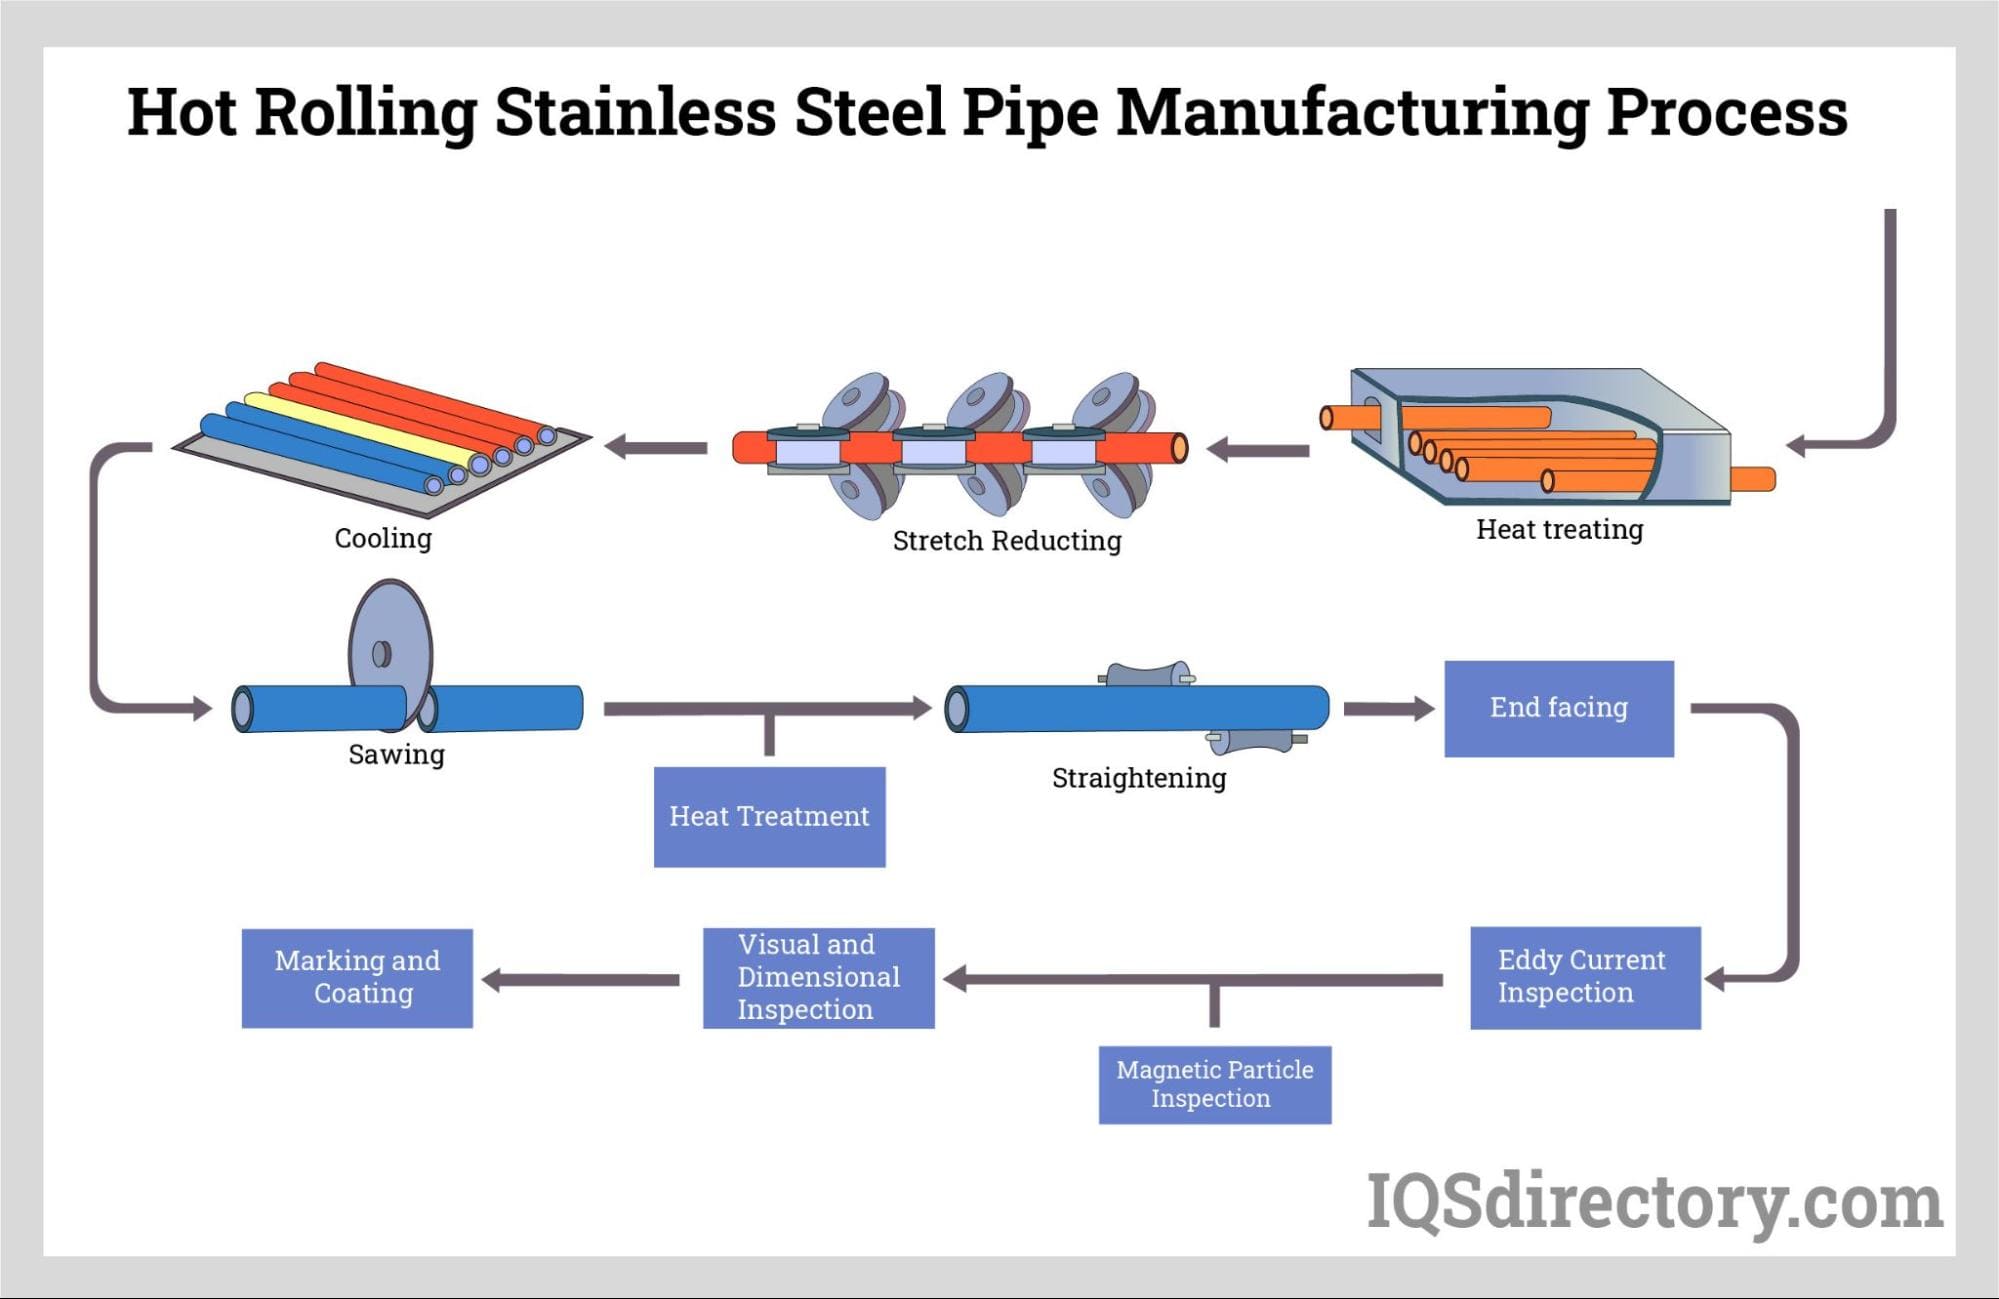 Hot Rolling Stainless Steel Pipe Manufacturing Process